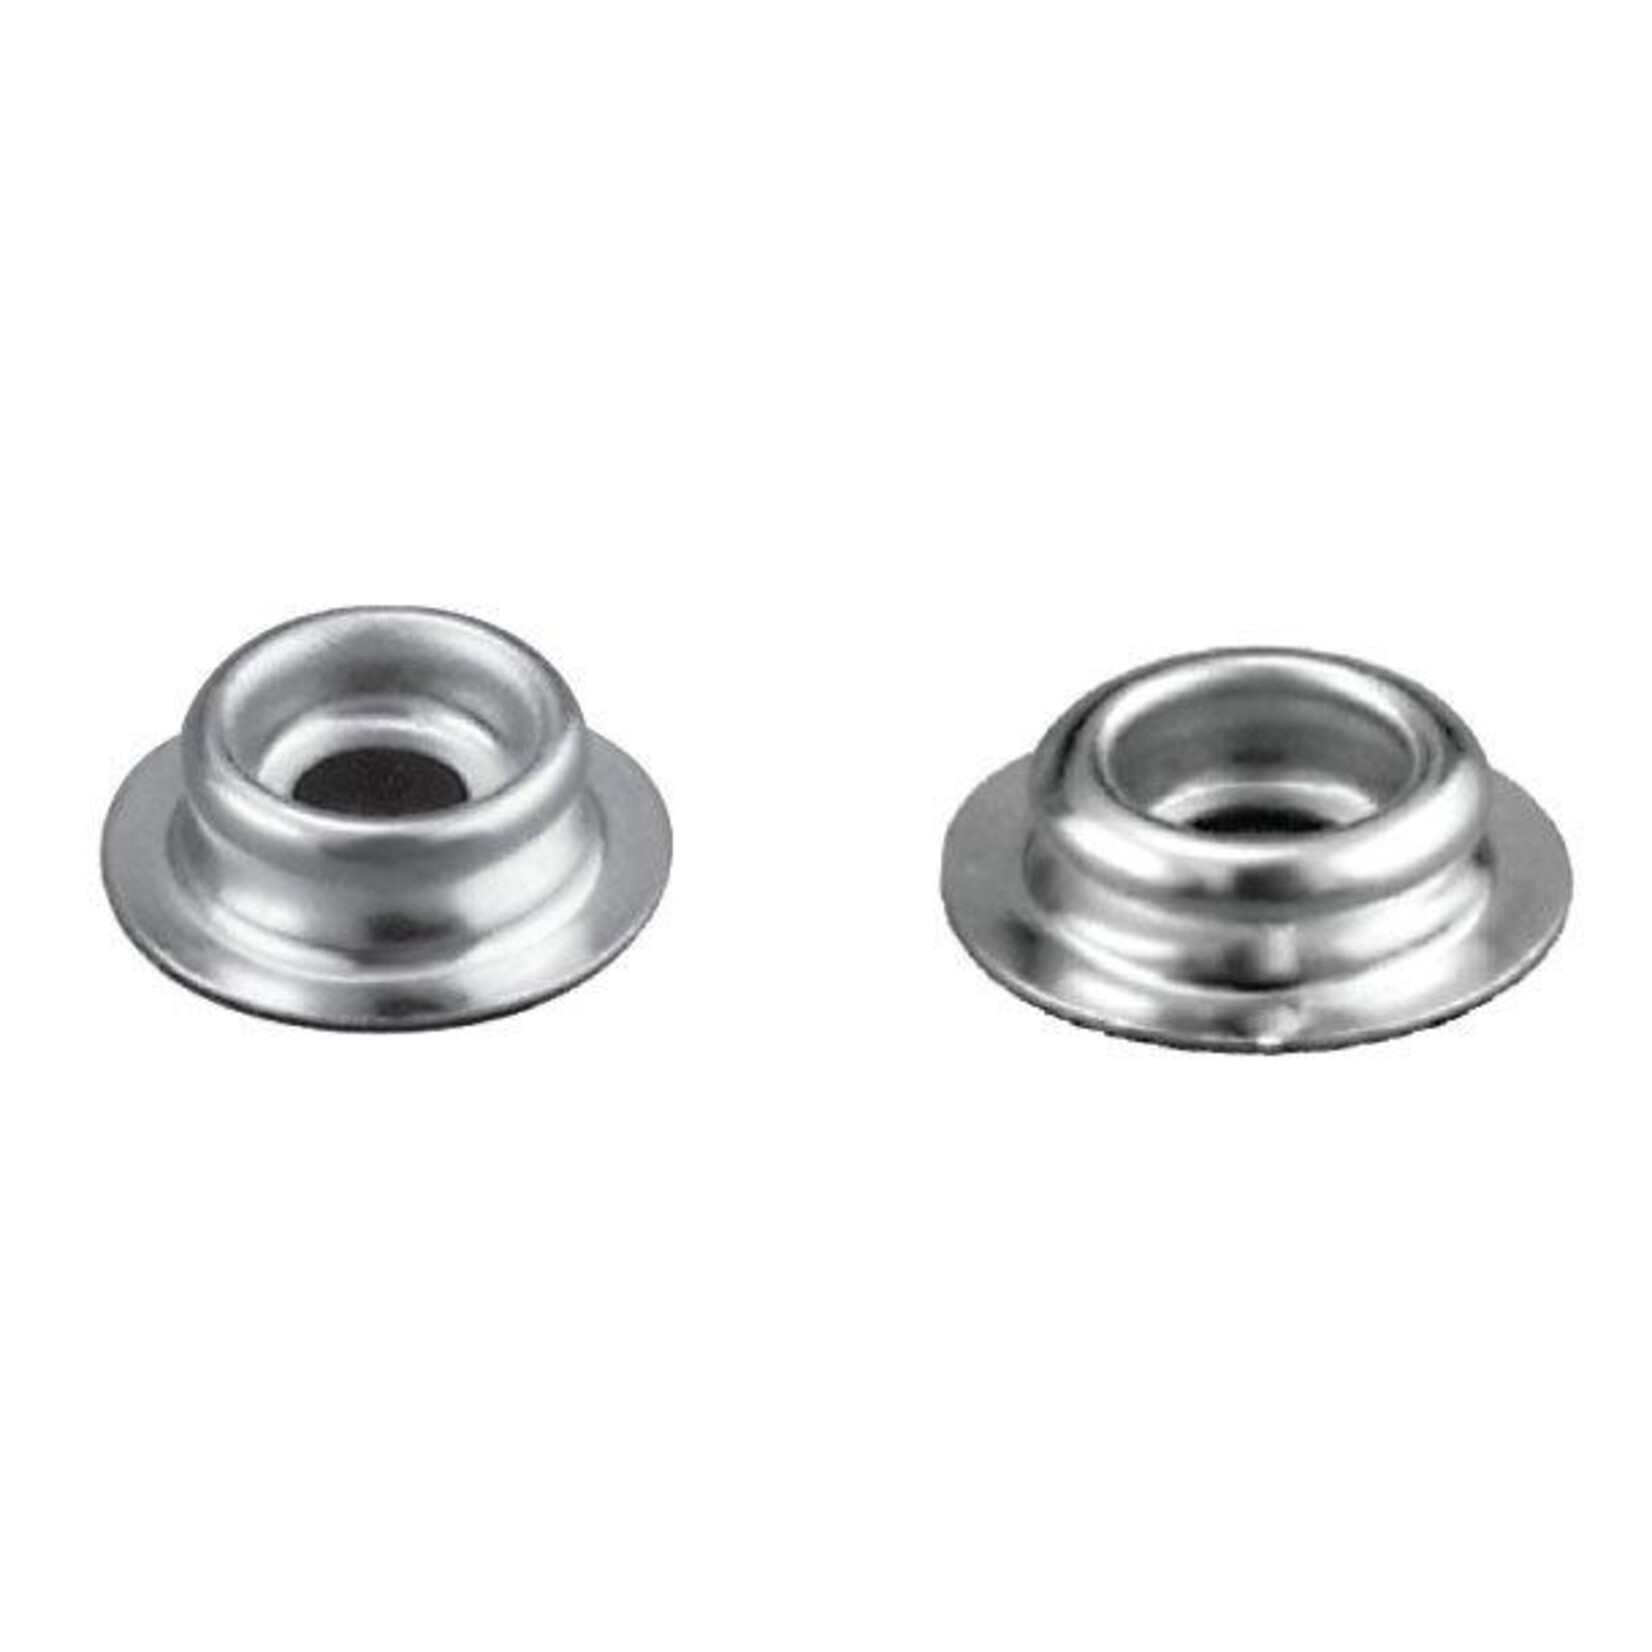 Fasnap Stud Stainless steel     p/100